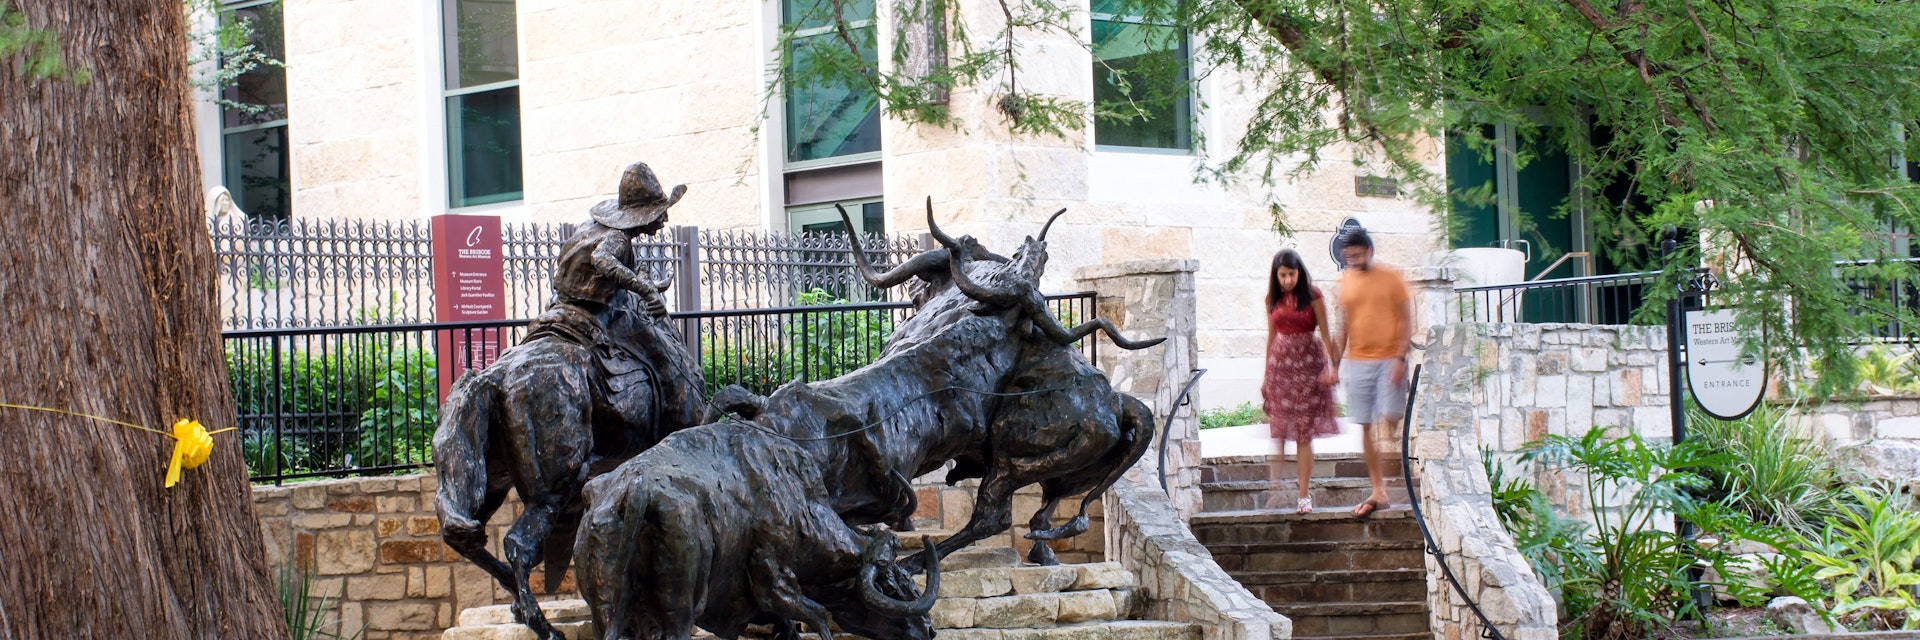 San Antonio, TX/USA- May 18 2019: "Coming Home to the Briscoe" is a statue by artist T.J.Kelsey outside the Briscoe Western Art Museum along the San Antonio River Walk, San Antonio, Texas.; Shutterstock ID 1444943180; your: Bridget Brown; gl: 65050; netsuite: Online Editorial; full: POI Image Update